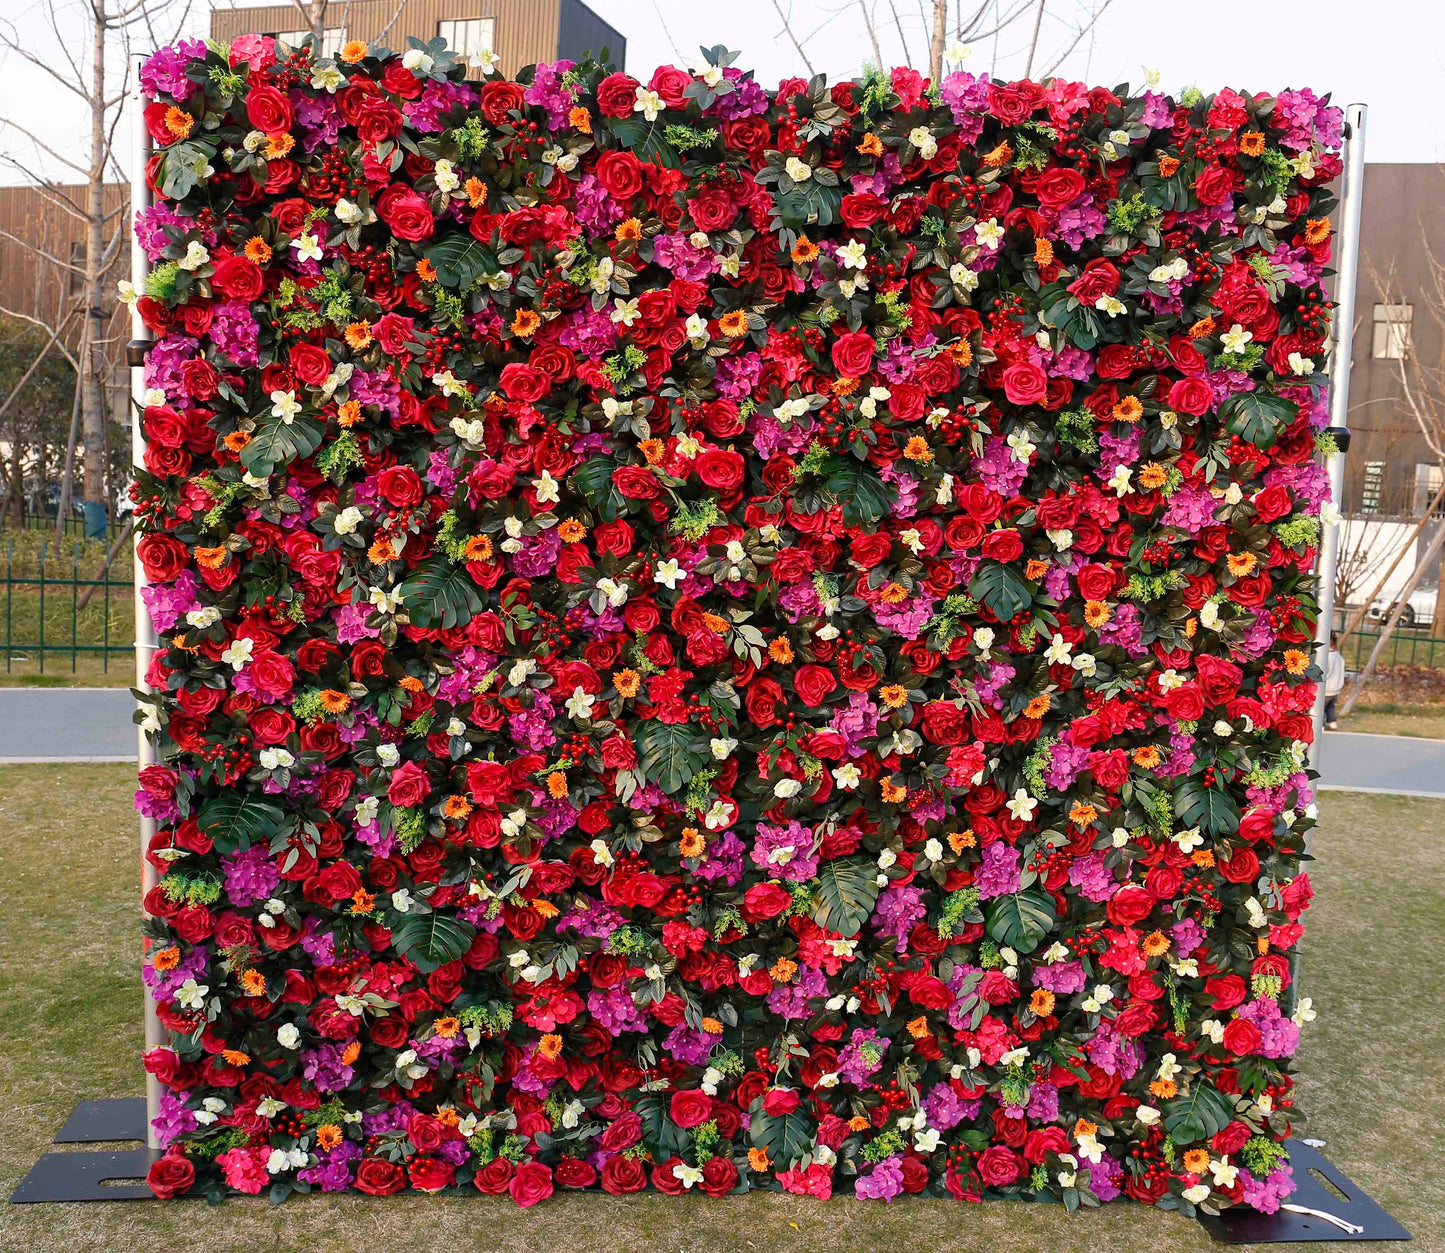 New Design Red Flower Wall For Wedding Arrangement Event Salon Party Photography Backdrop Fabric Rolling Up Curtain Fabric Cloth